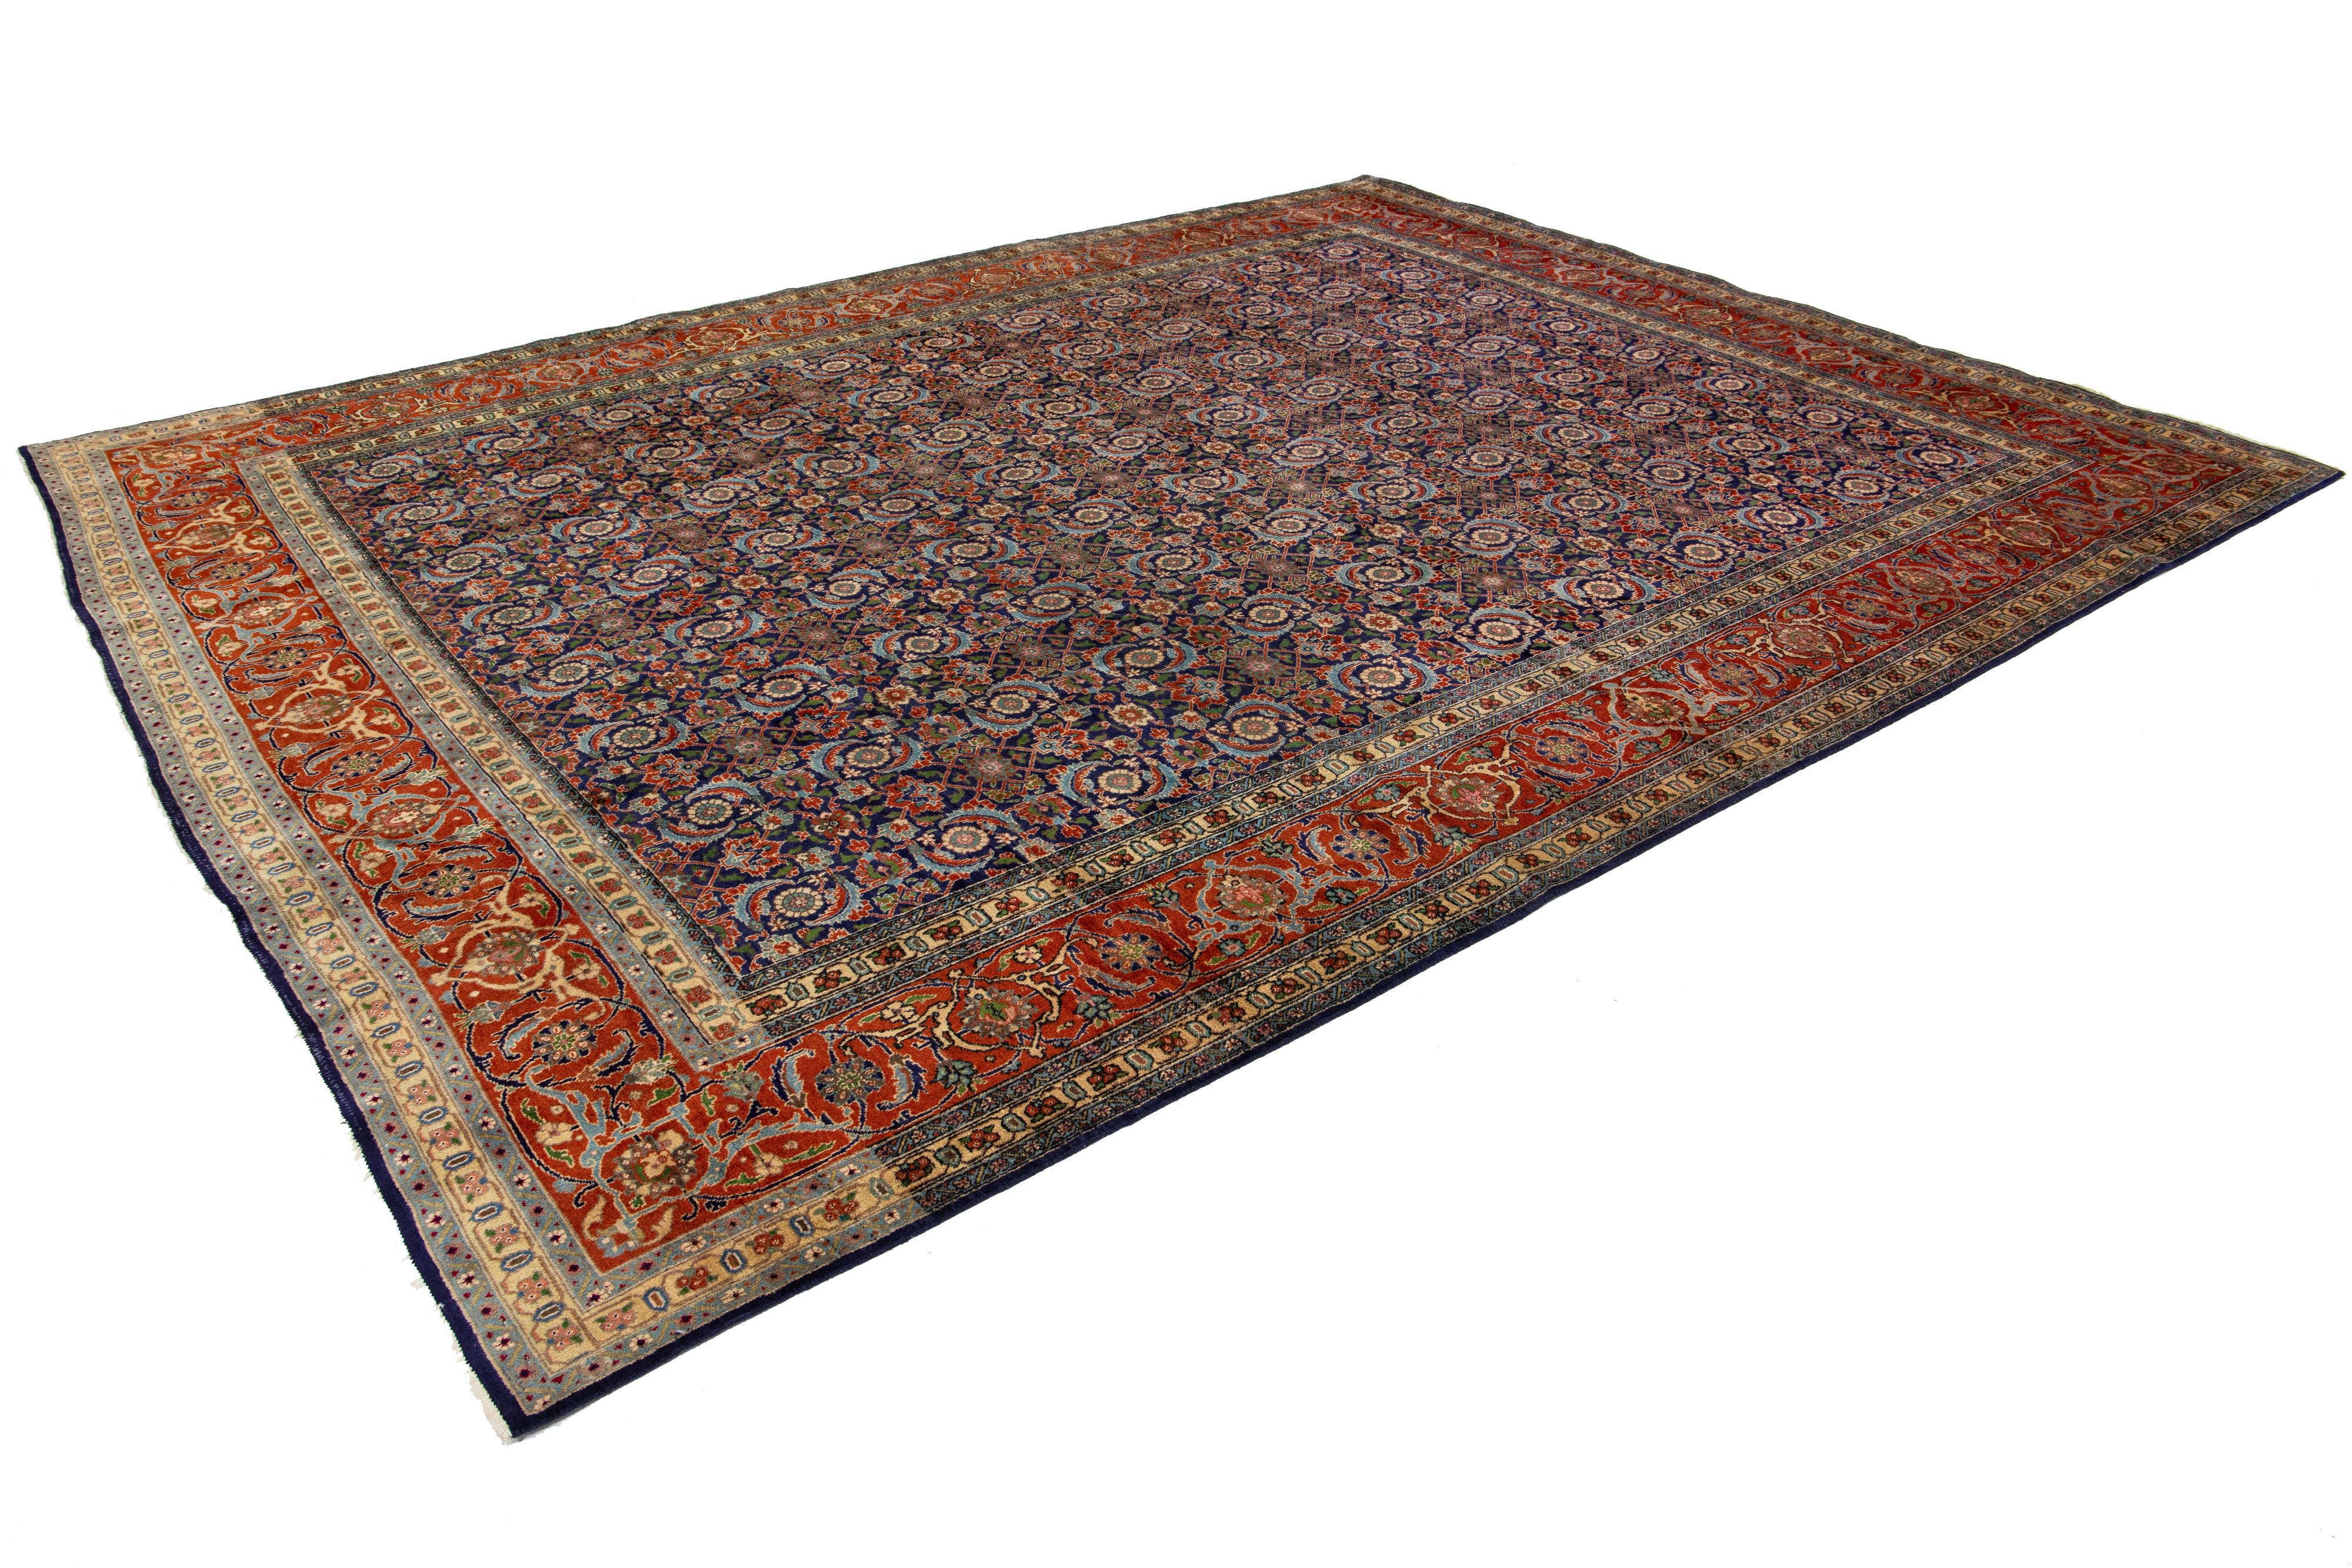 Blue and Orange Antique Wool Rug Persian Tabriz From 1920s with allover Design For Sale 4